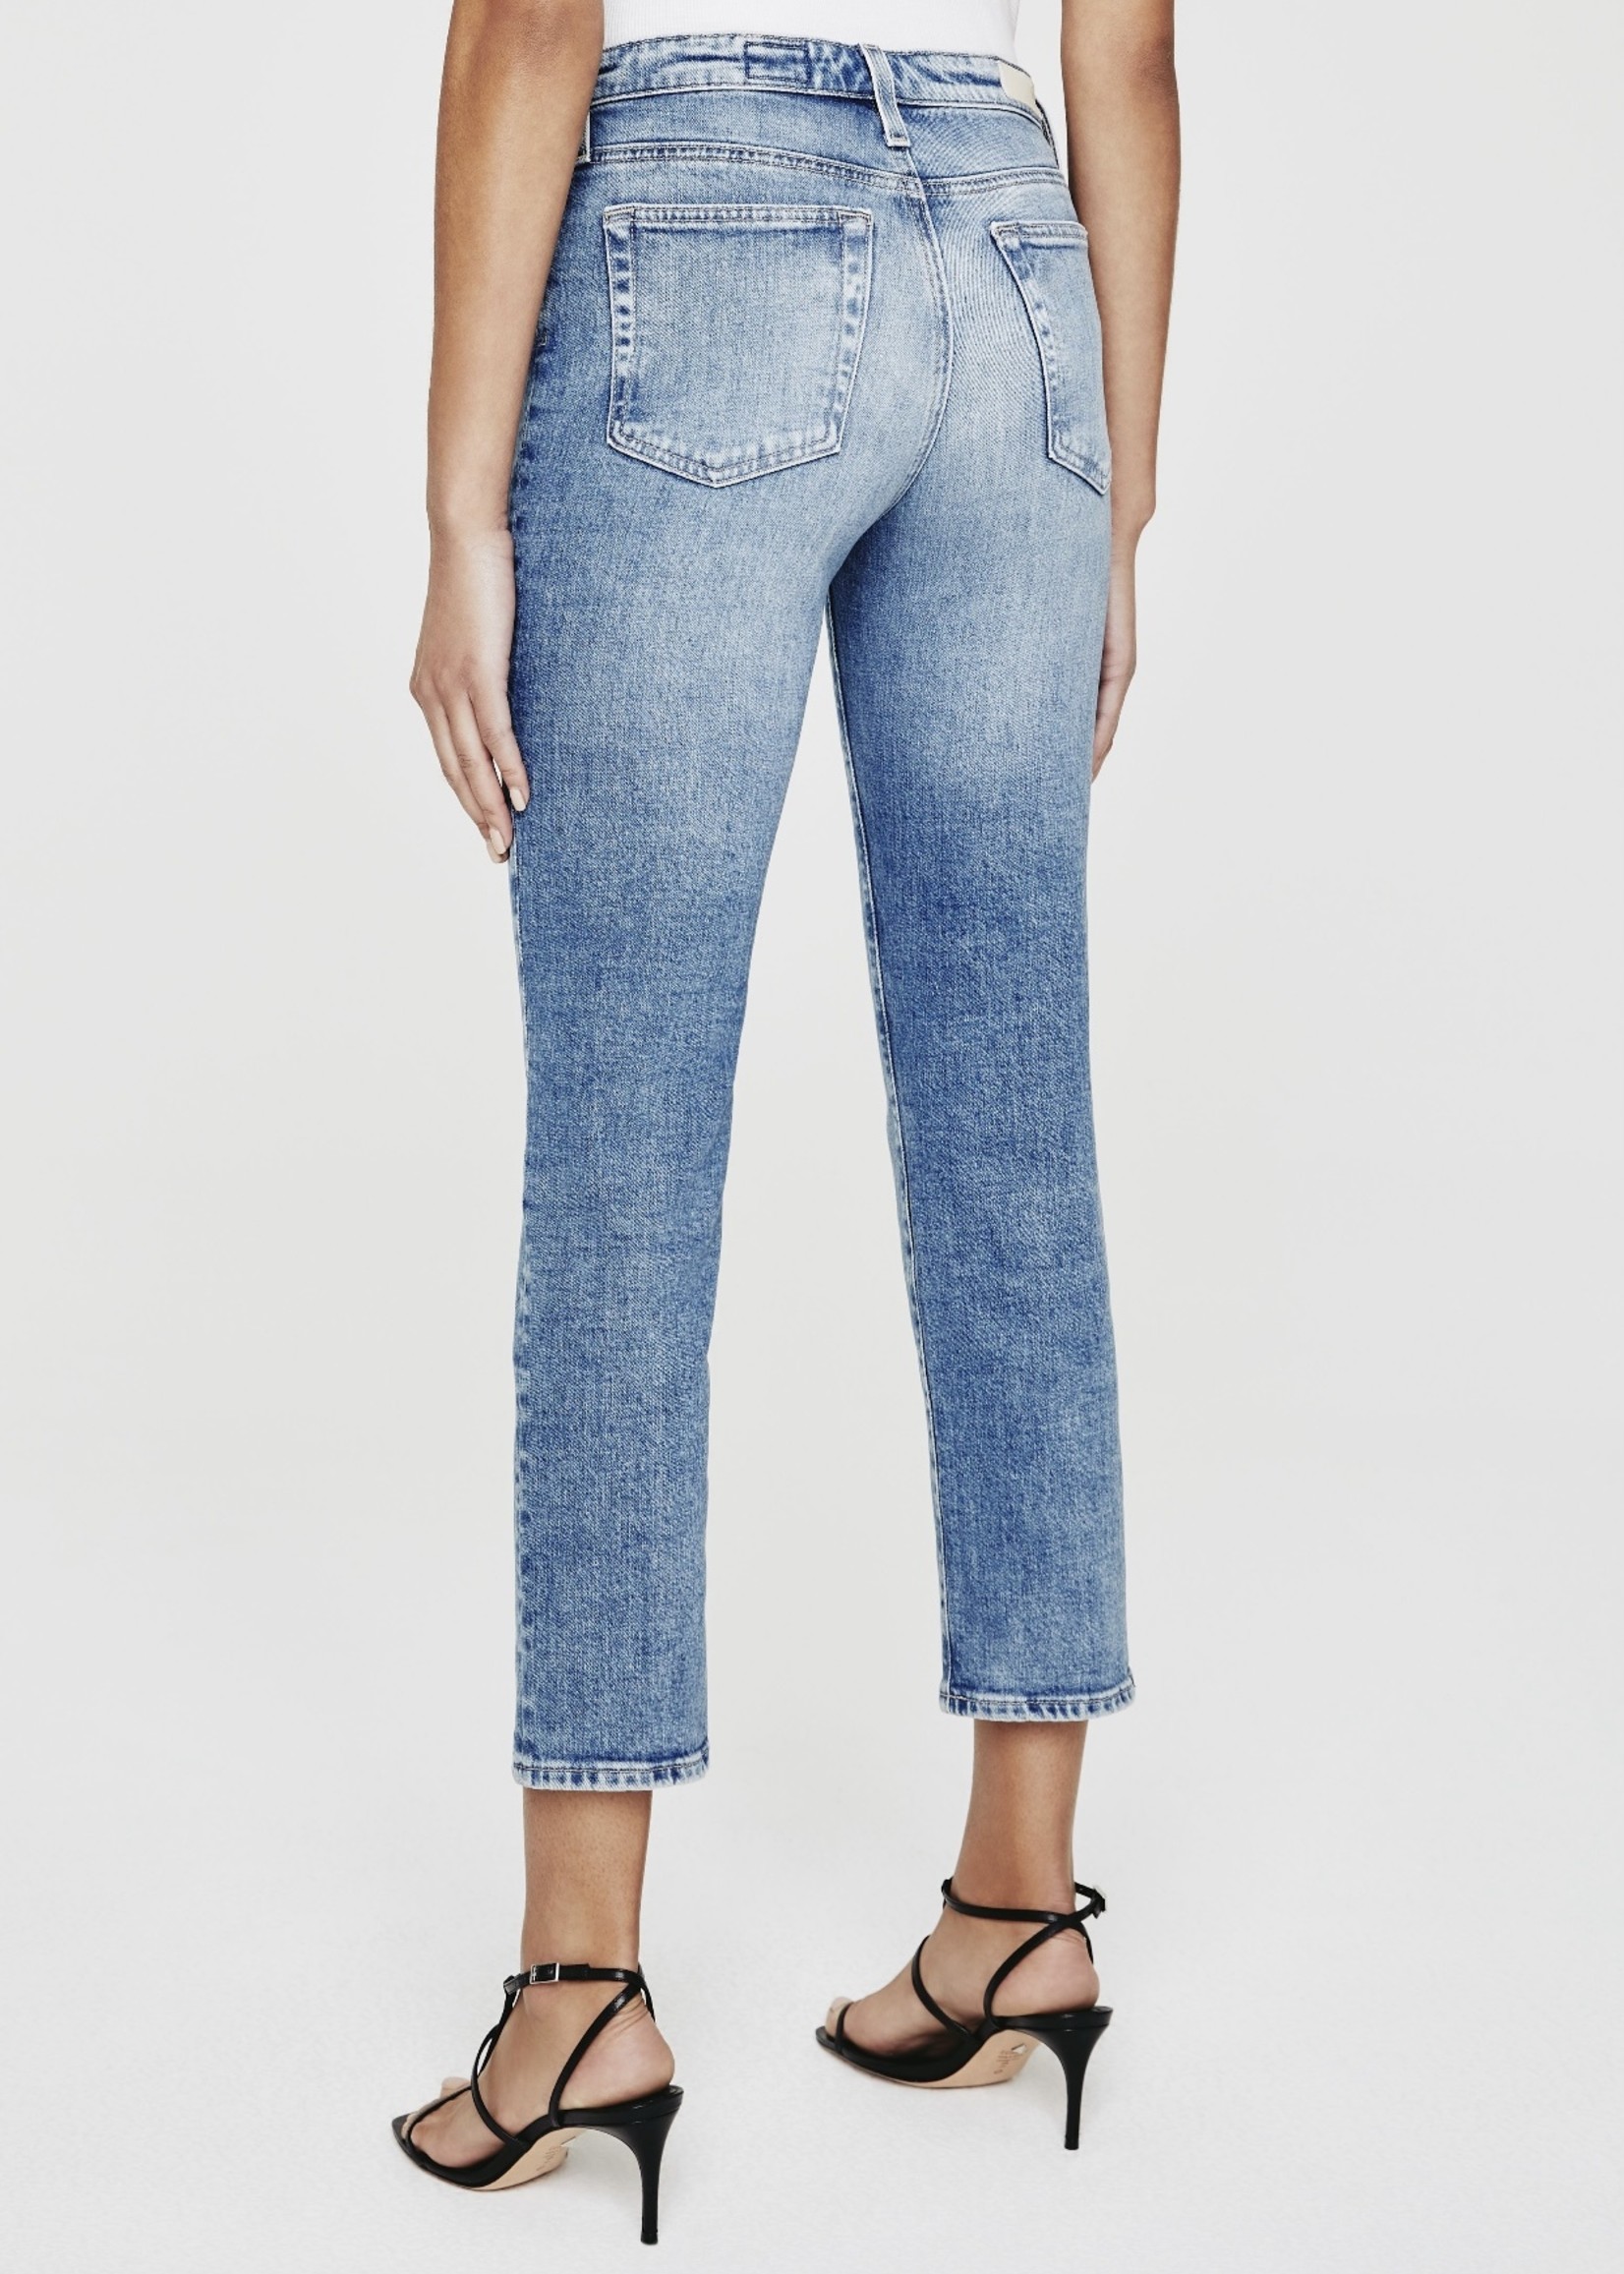 AG JEANS ISABELLE COTY COURTYARD - JRN1753COTY -